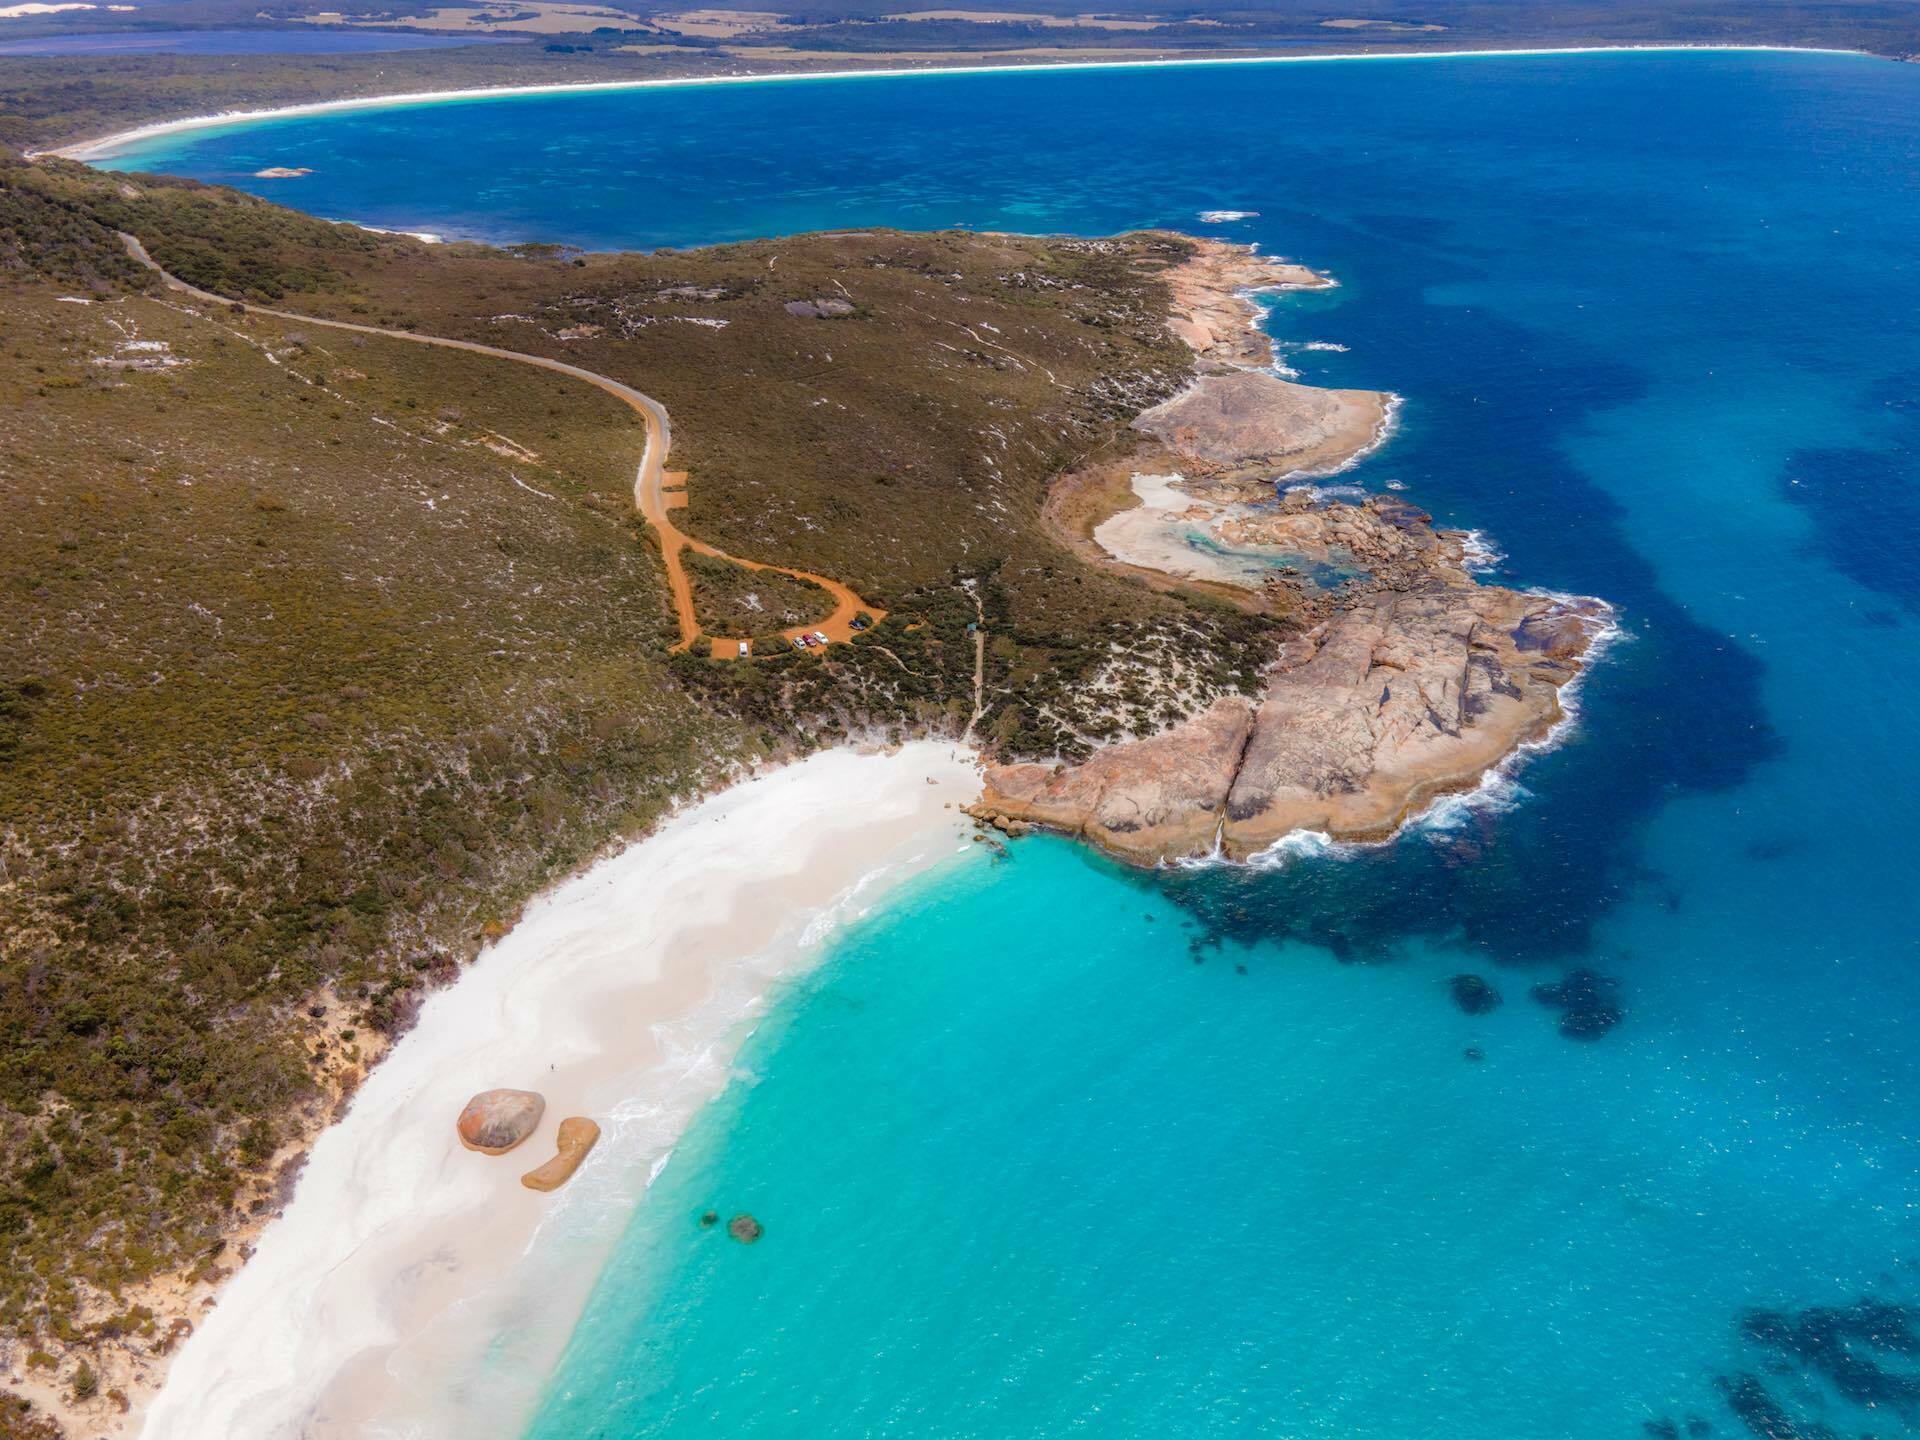 Road Tripping WA's South-West Corner, Michael Heritage, Two People's Bay, drone shot, beach, ocean